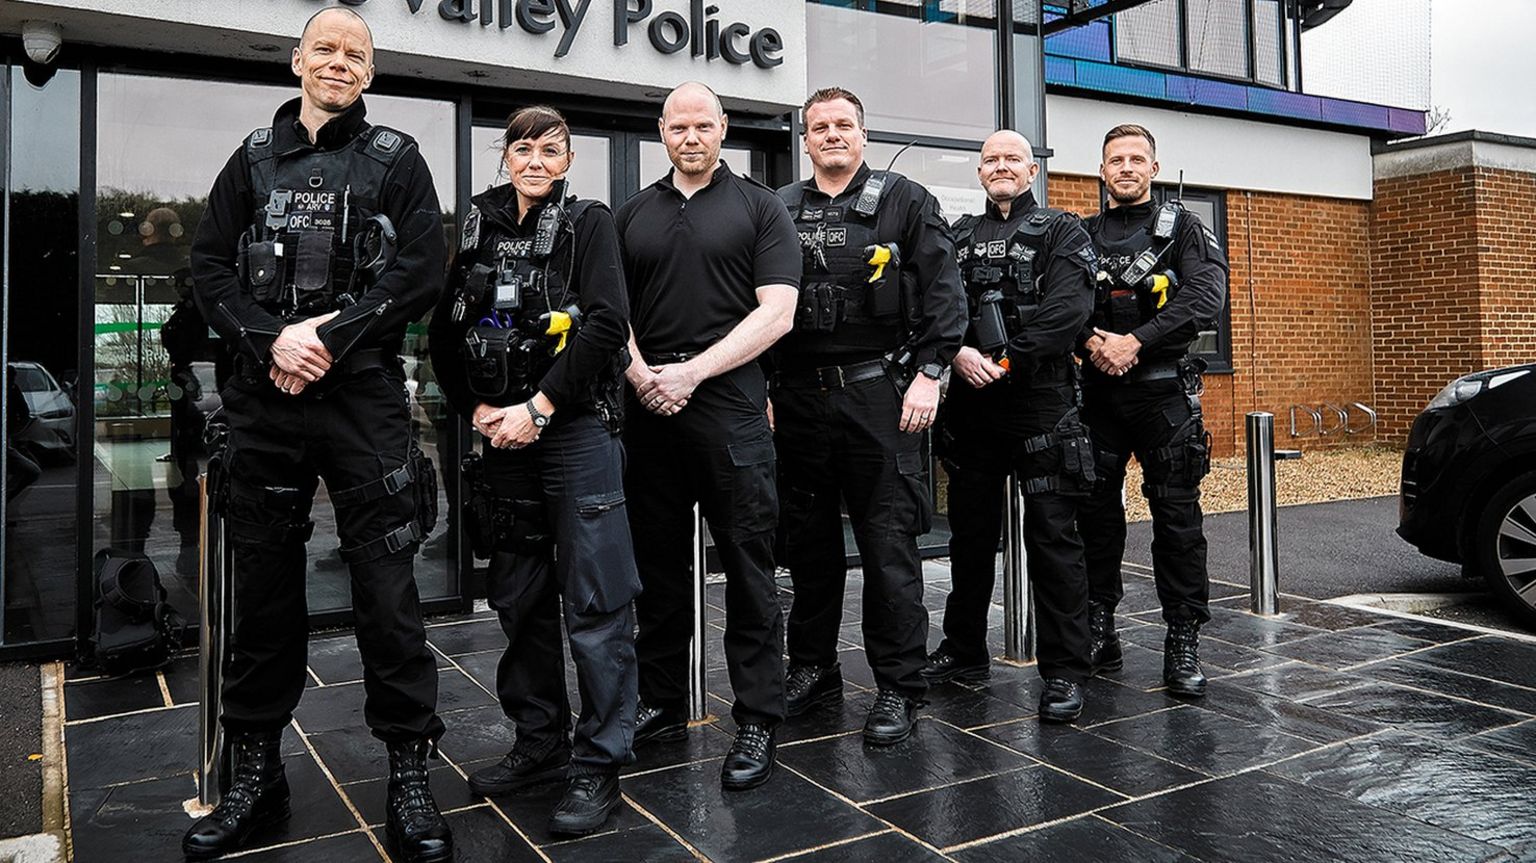 Thames Valley Police officers